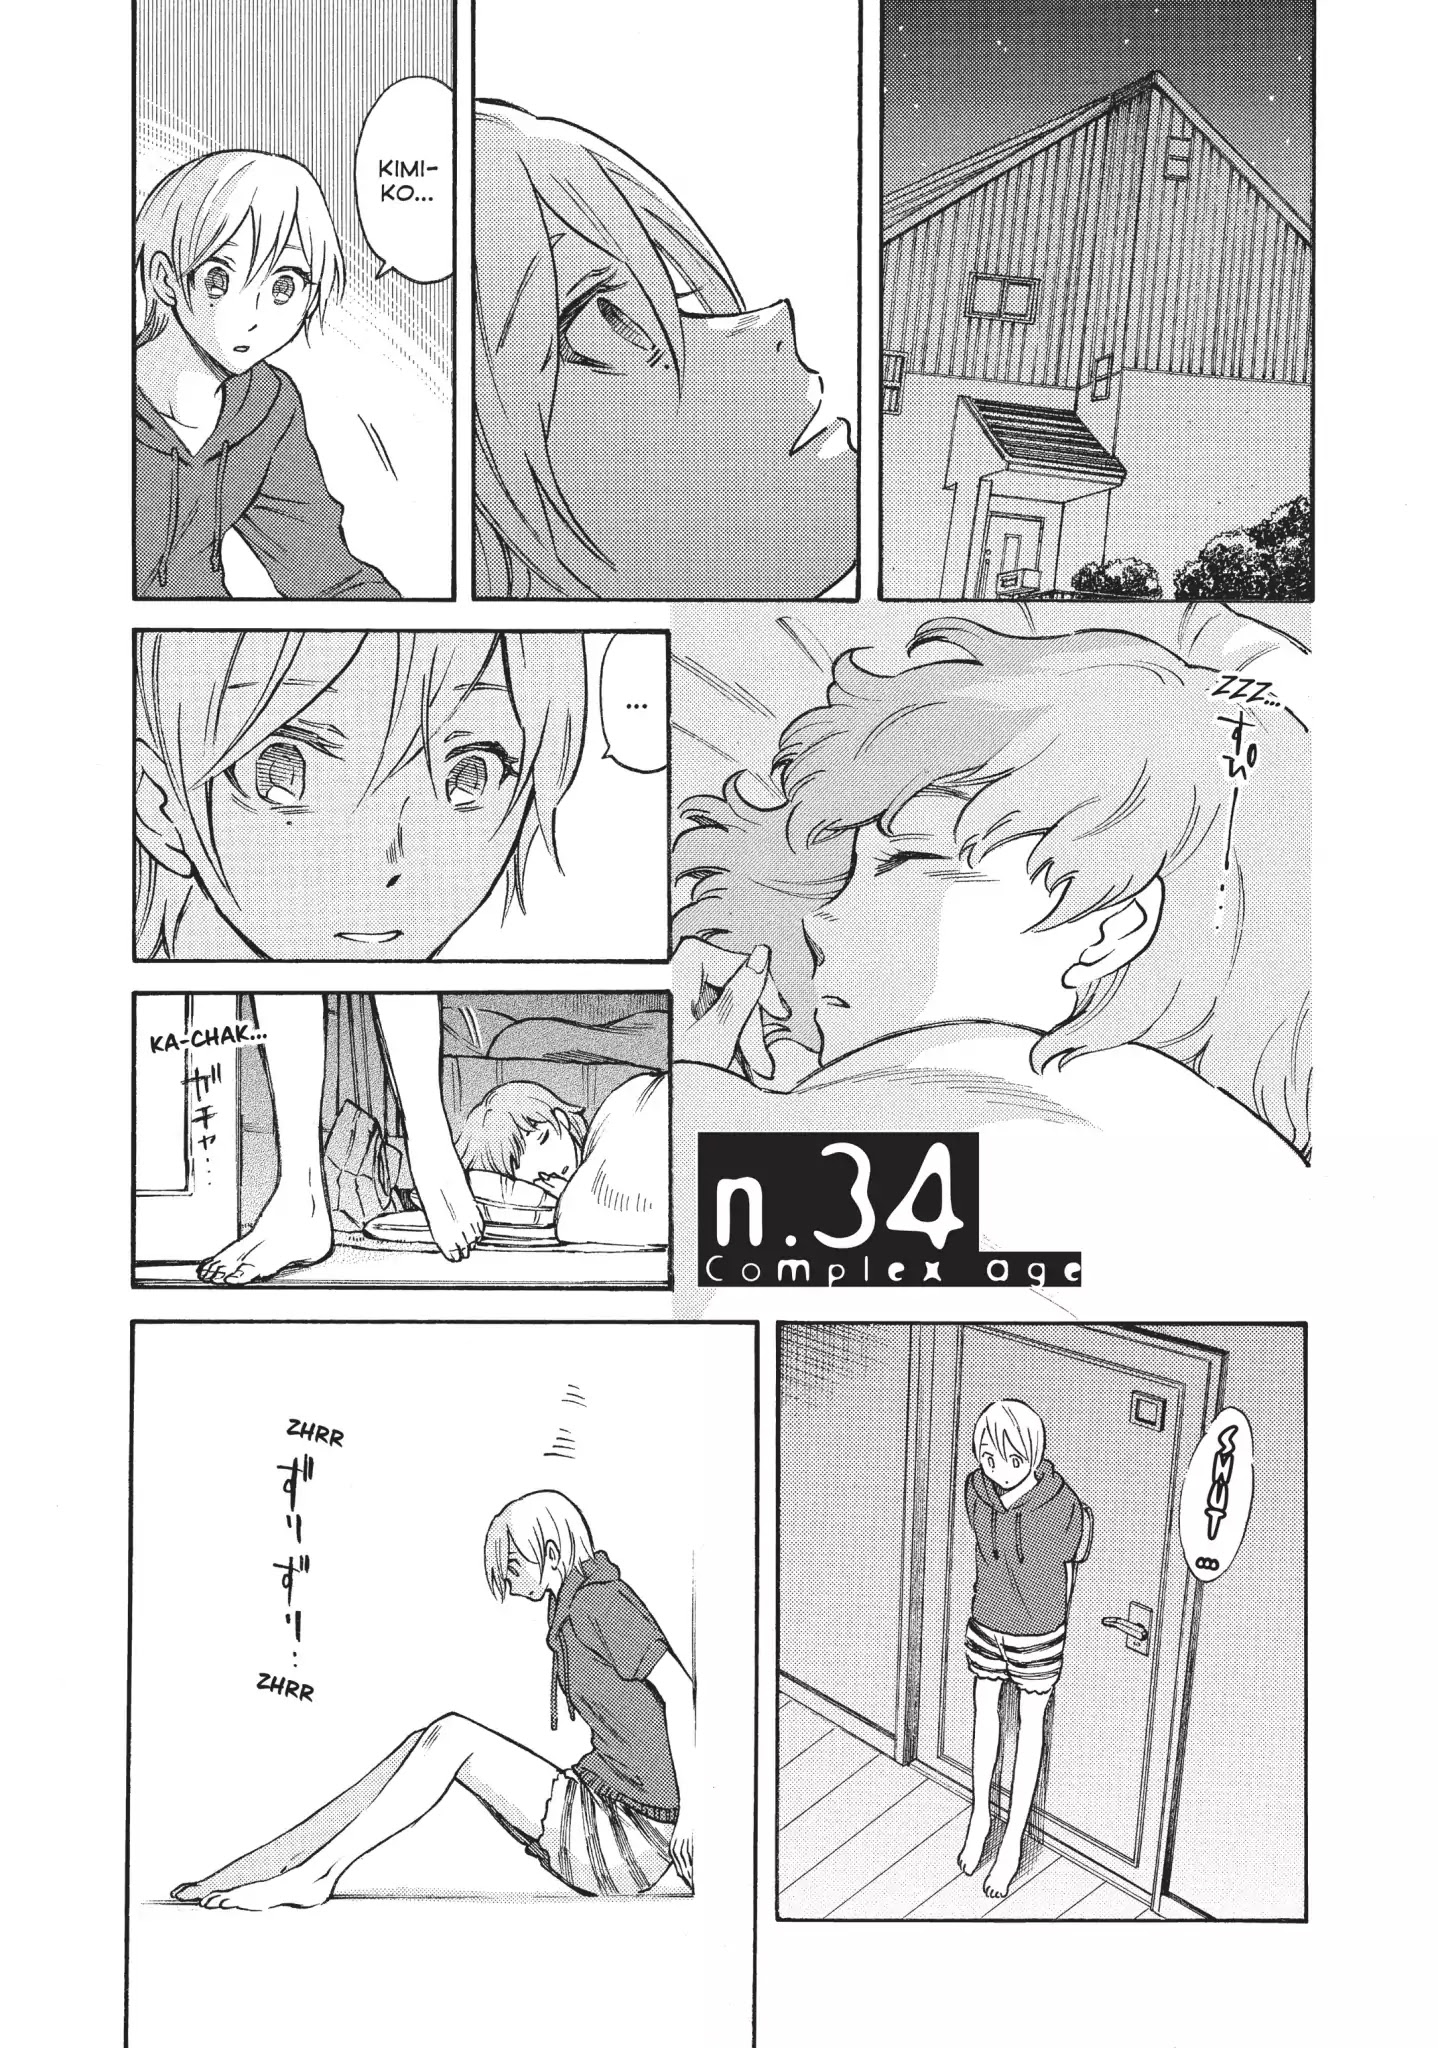 Complex Age Chapter 34 #4